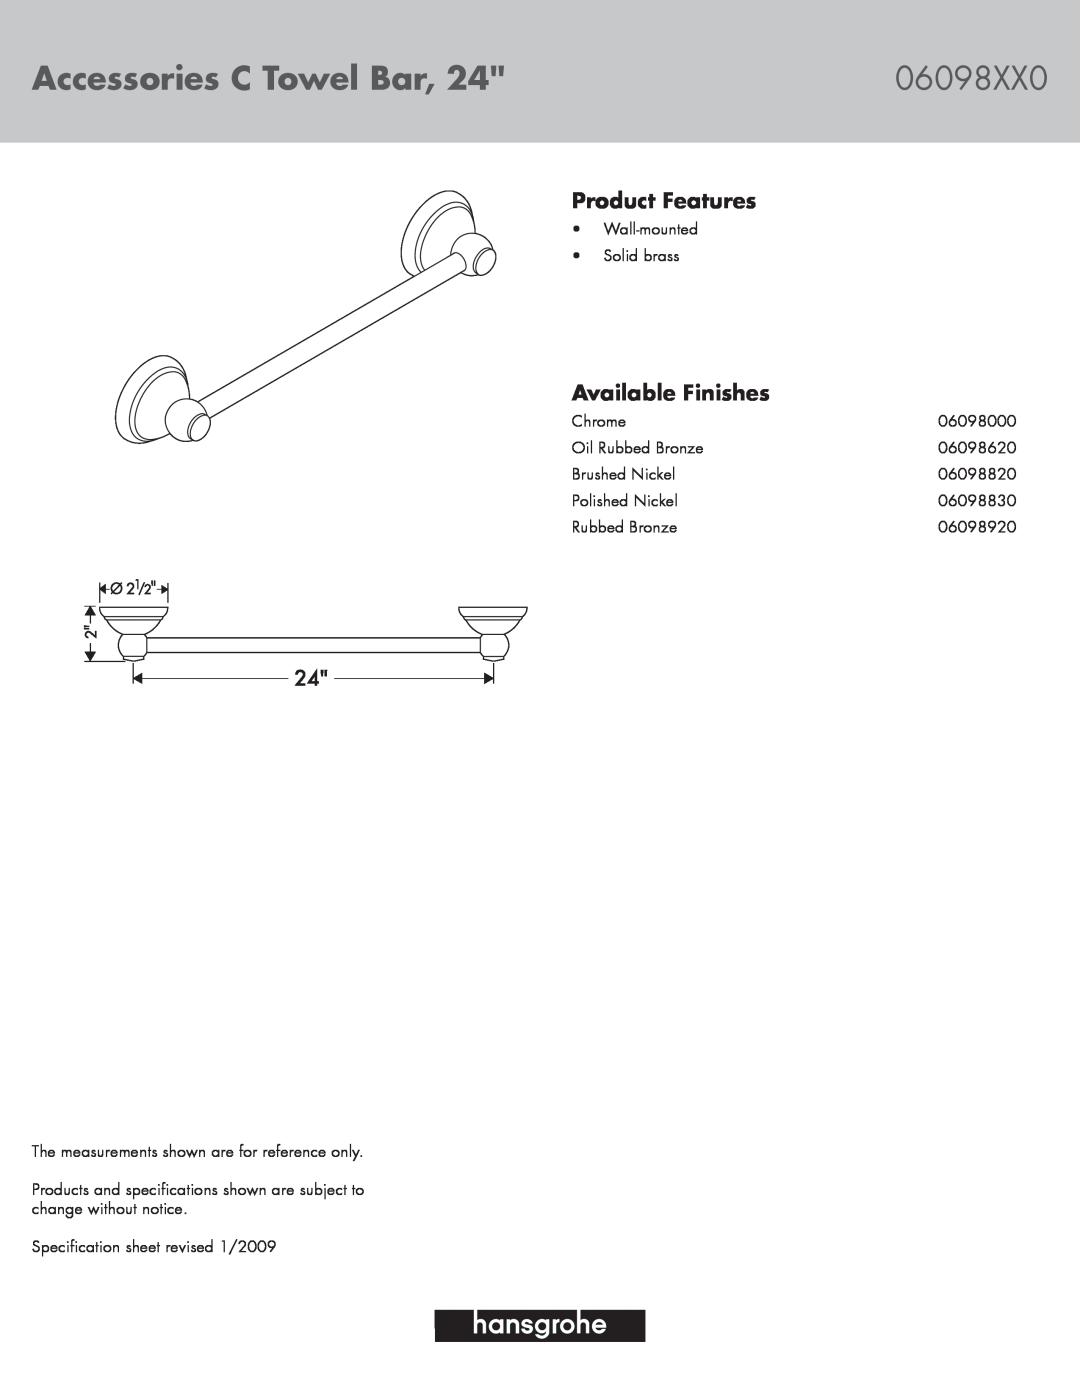 Hans Grohe 06098XX0 specifications Accessories C Towel Bar, Product Features, Available Finishes 